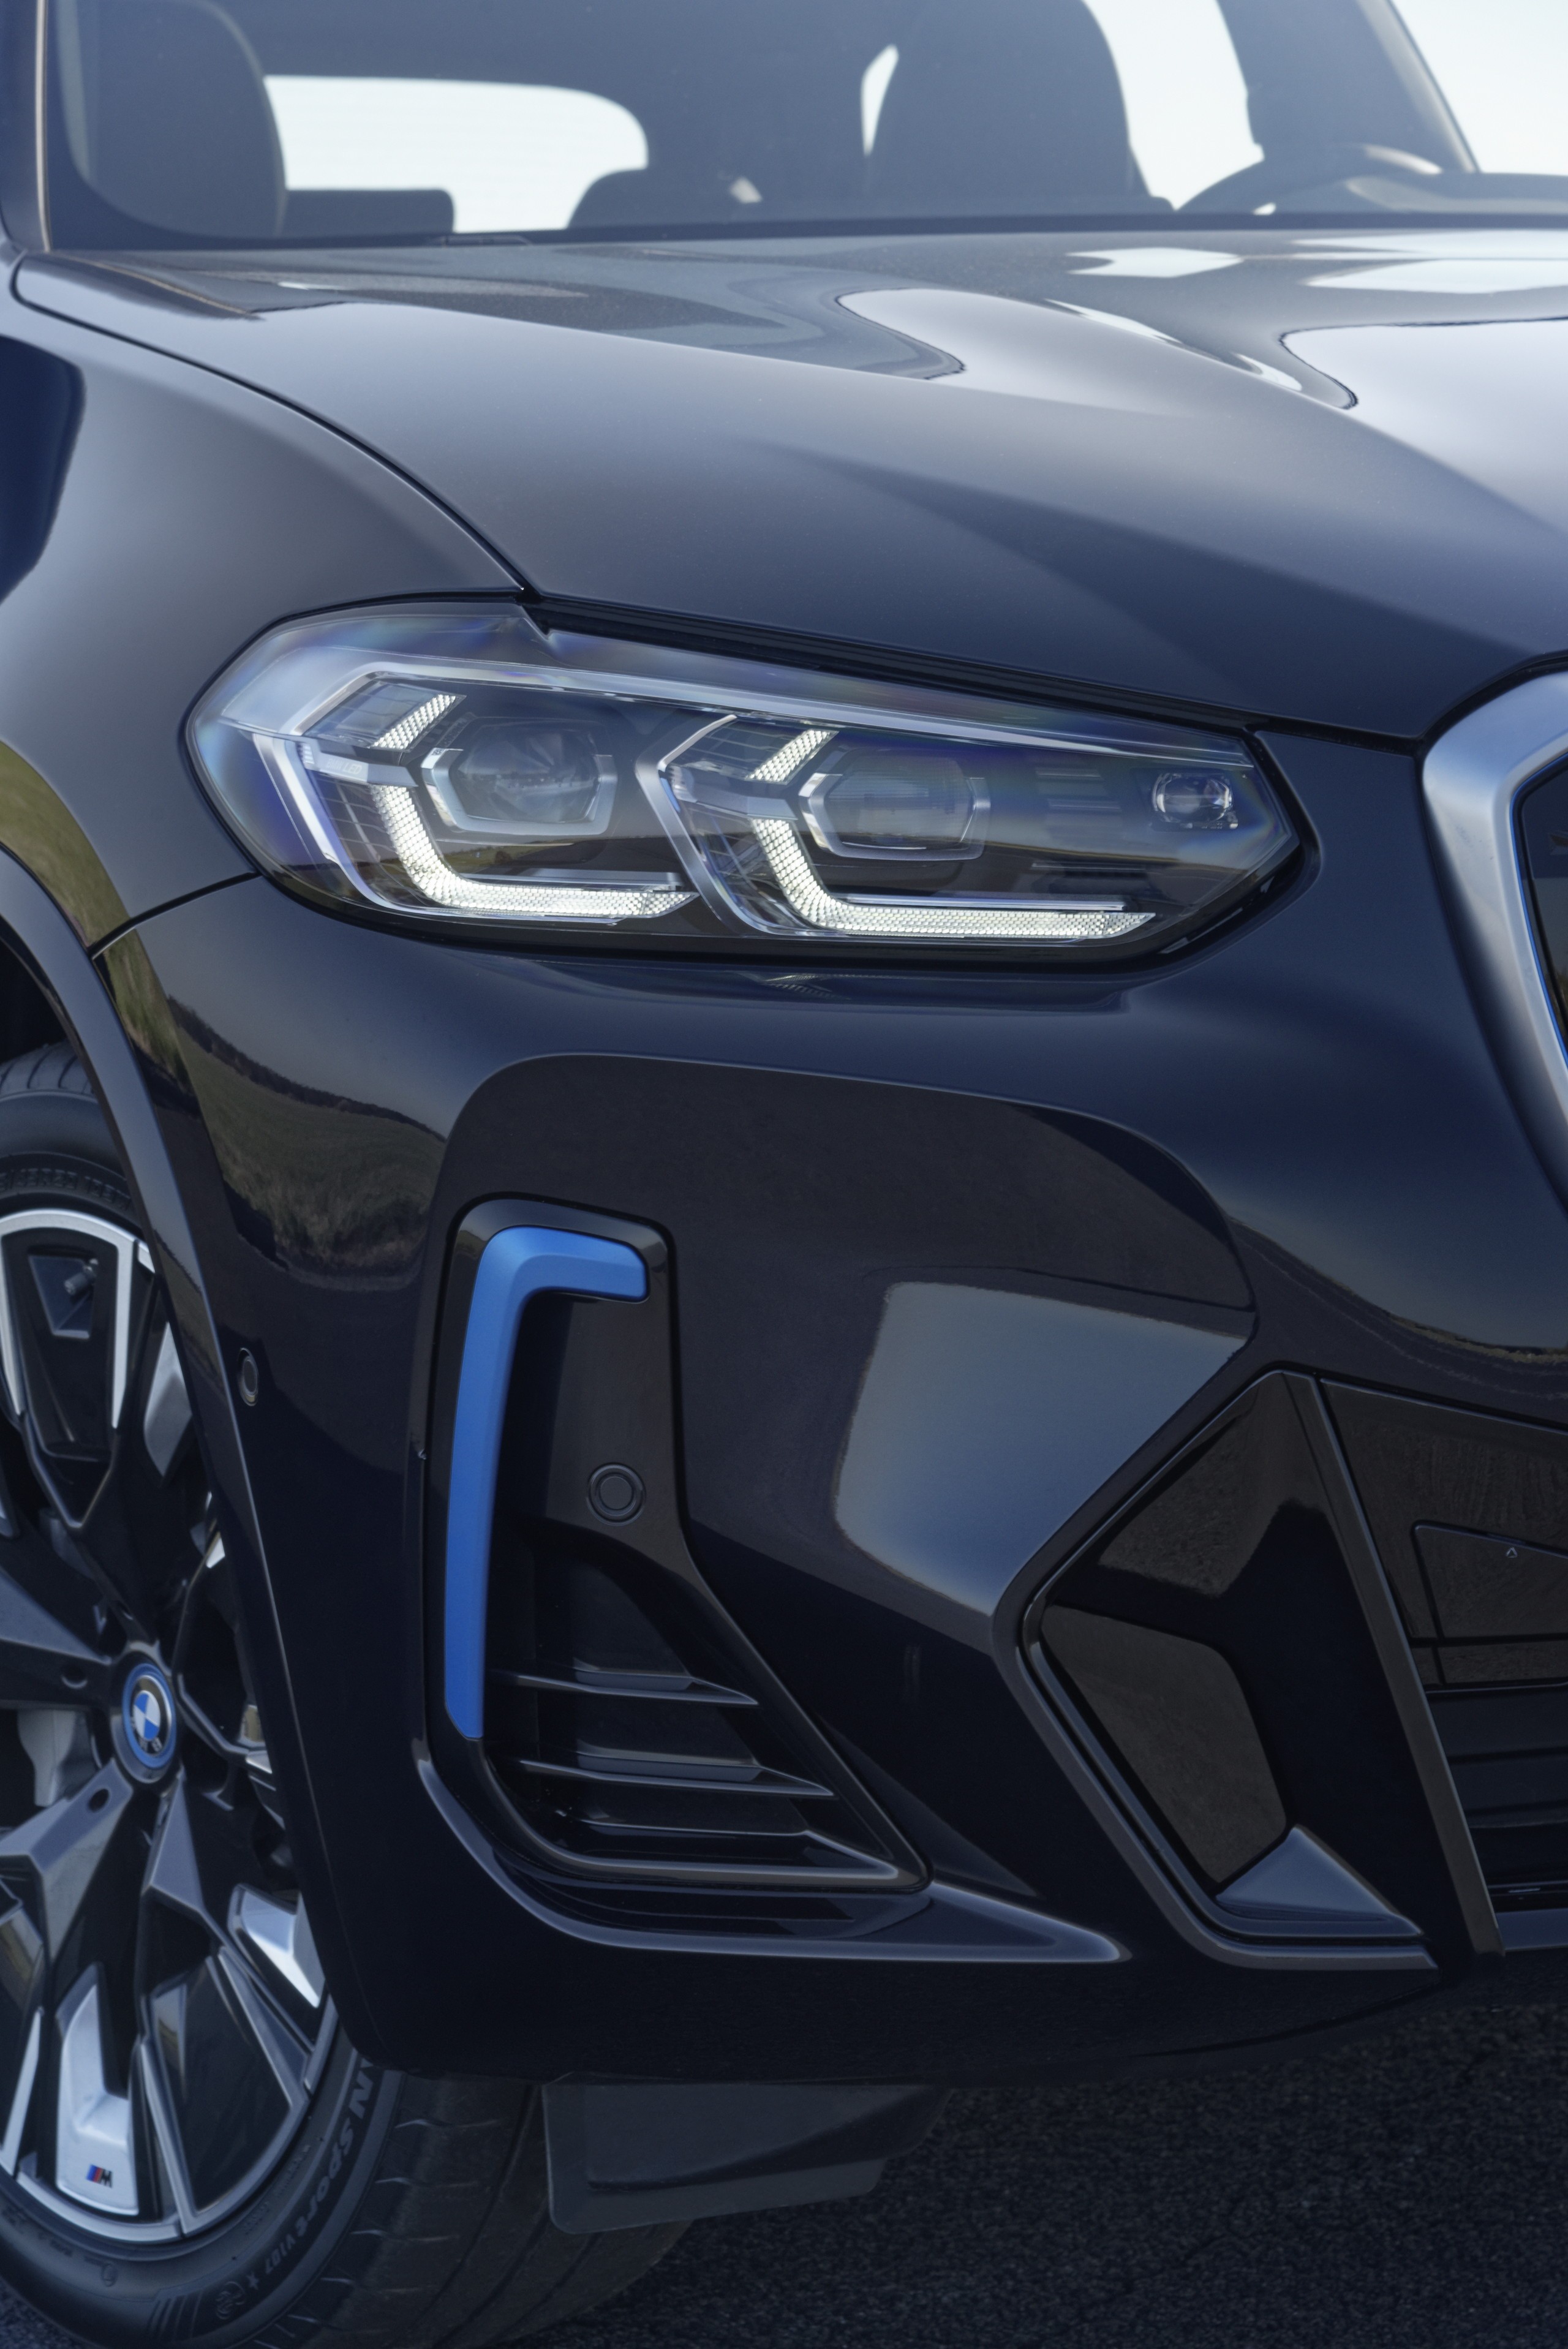 2022 BMW iX3 EV Crossover Gets Bigger Grille and New Tech in Mid-Cycle